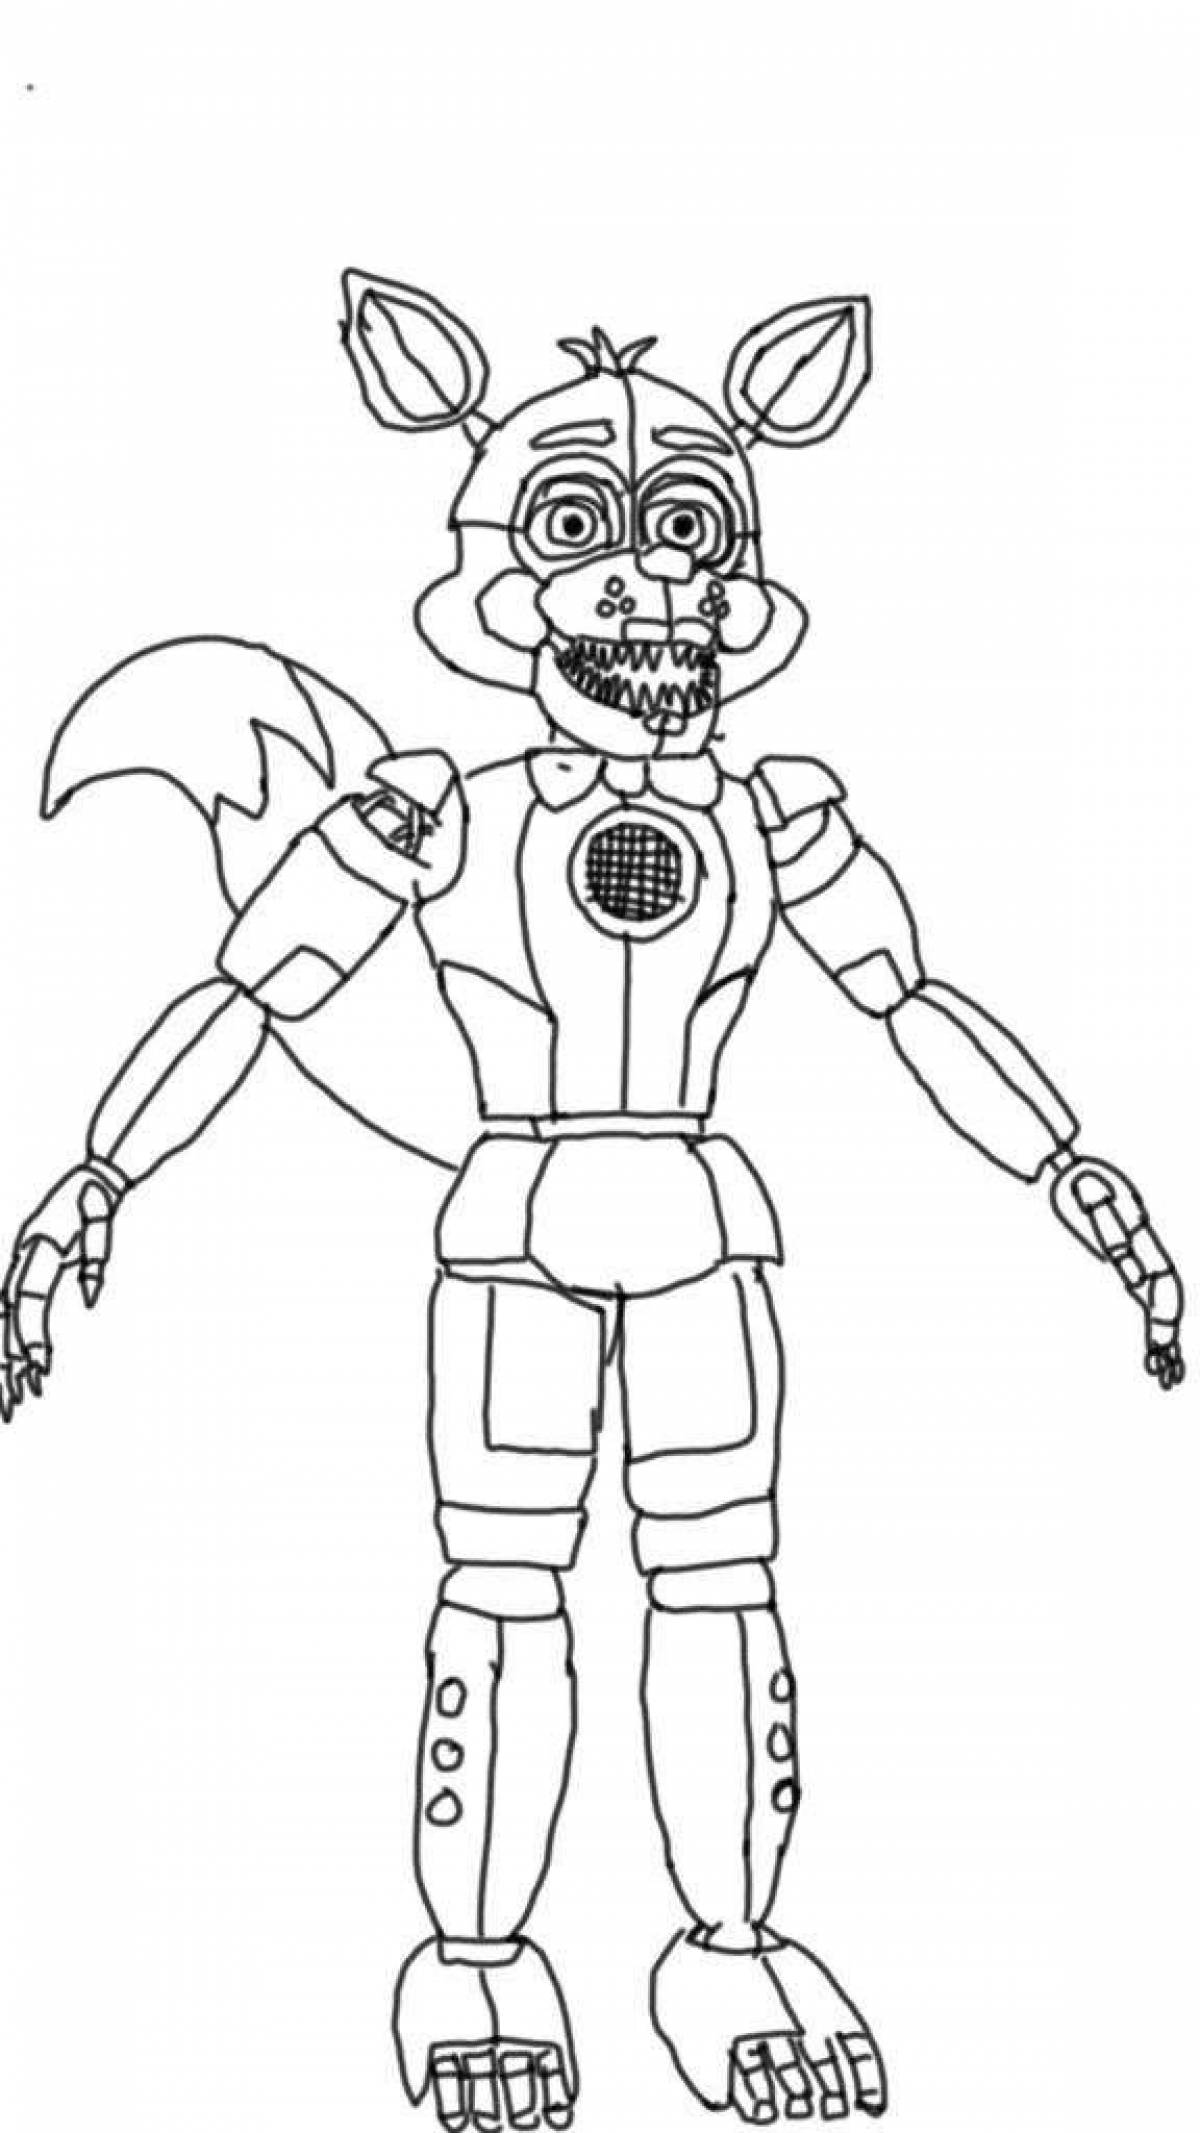 Colorful coloring of animatronic roxy